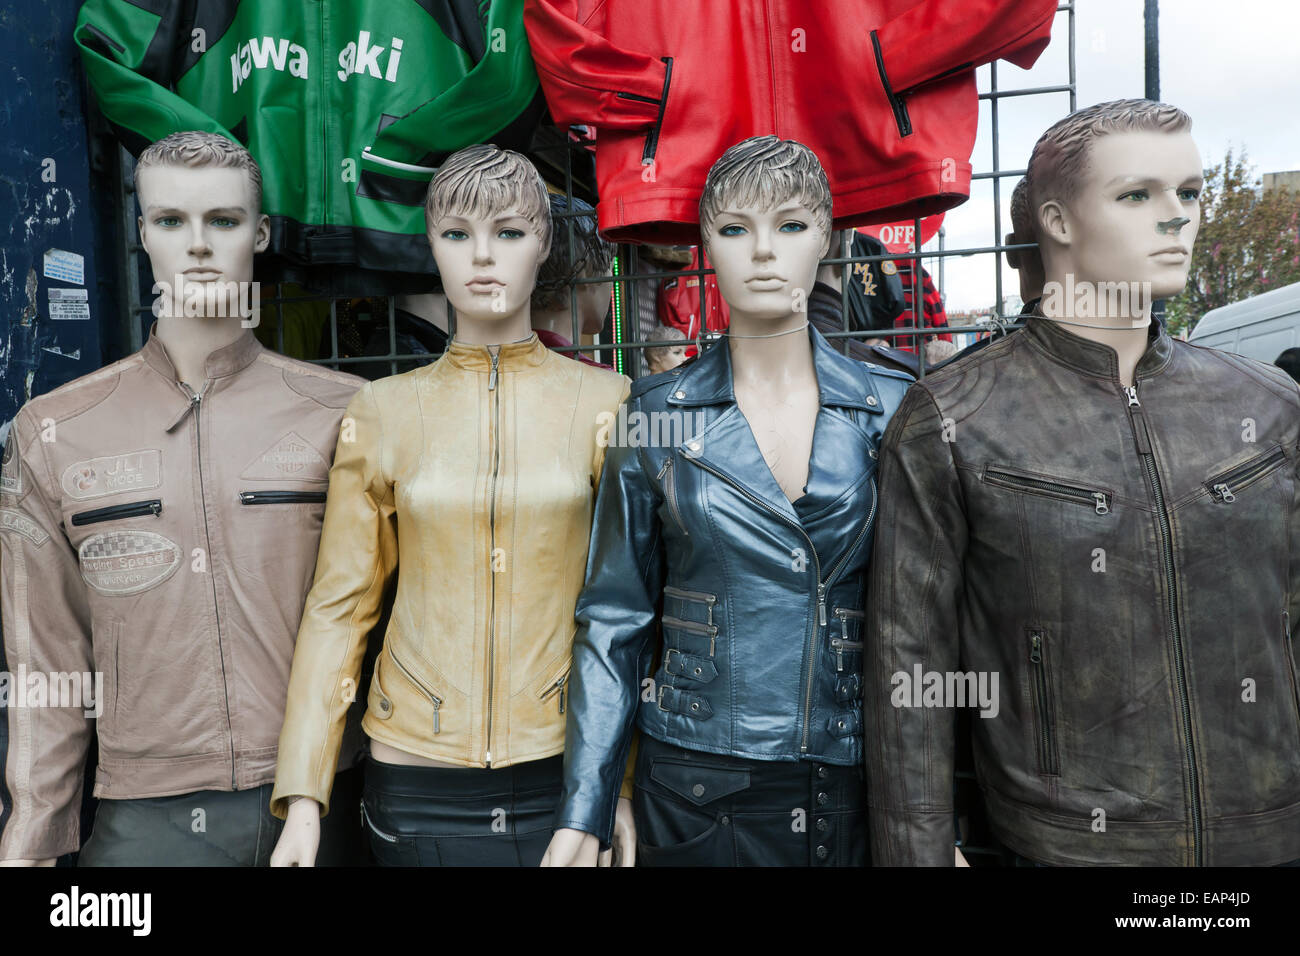 Dummies displaying jackets on  a stall in Camden Market, London Stock Photo